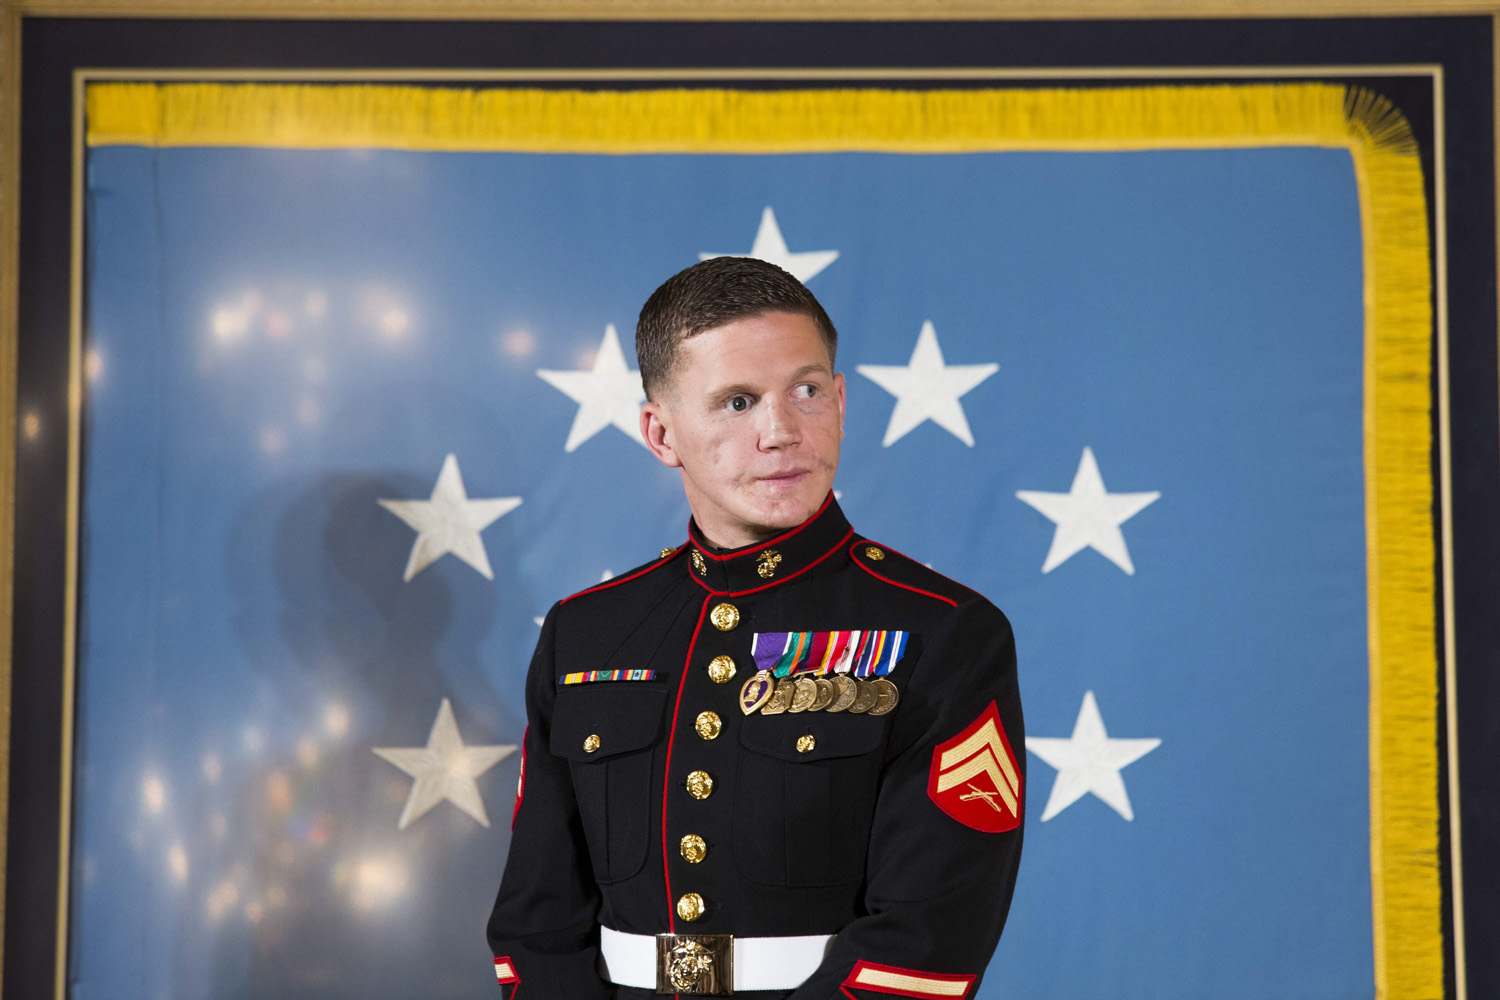 US Marine Corps Corporal William "Kyle" Carpenter awarded the Medal of Honor by U.S. President Barack Obama